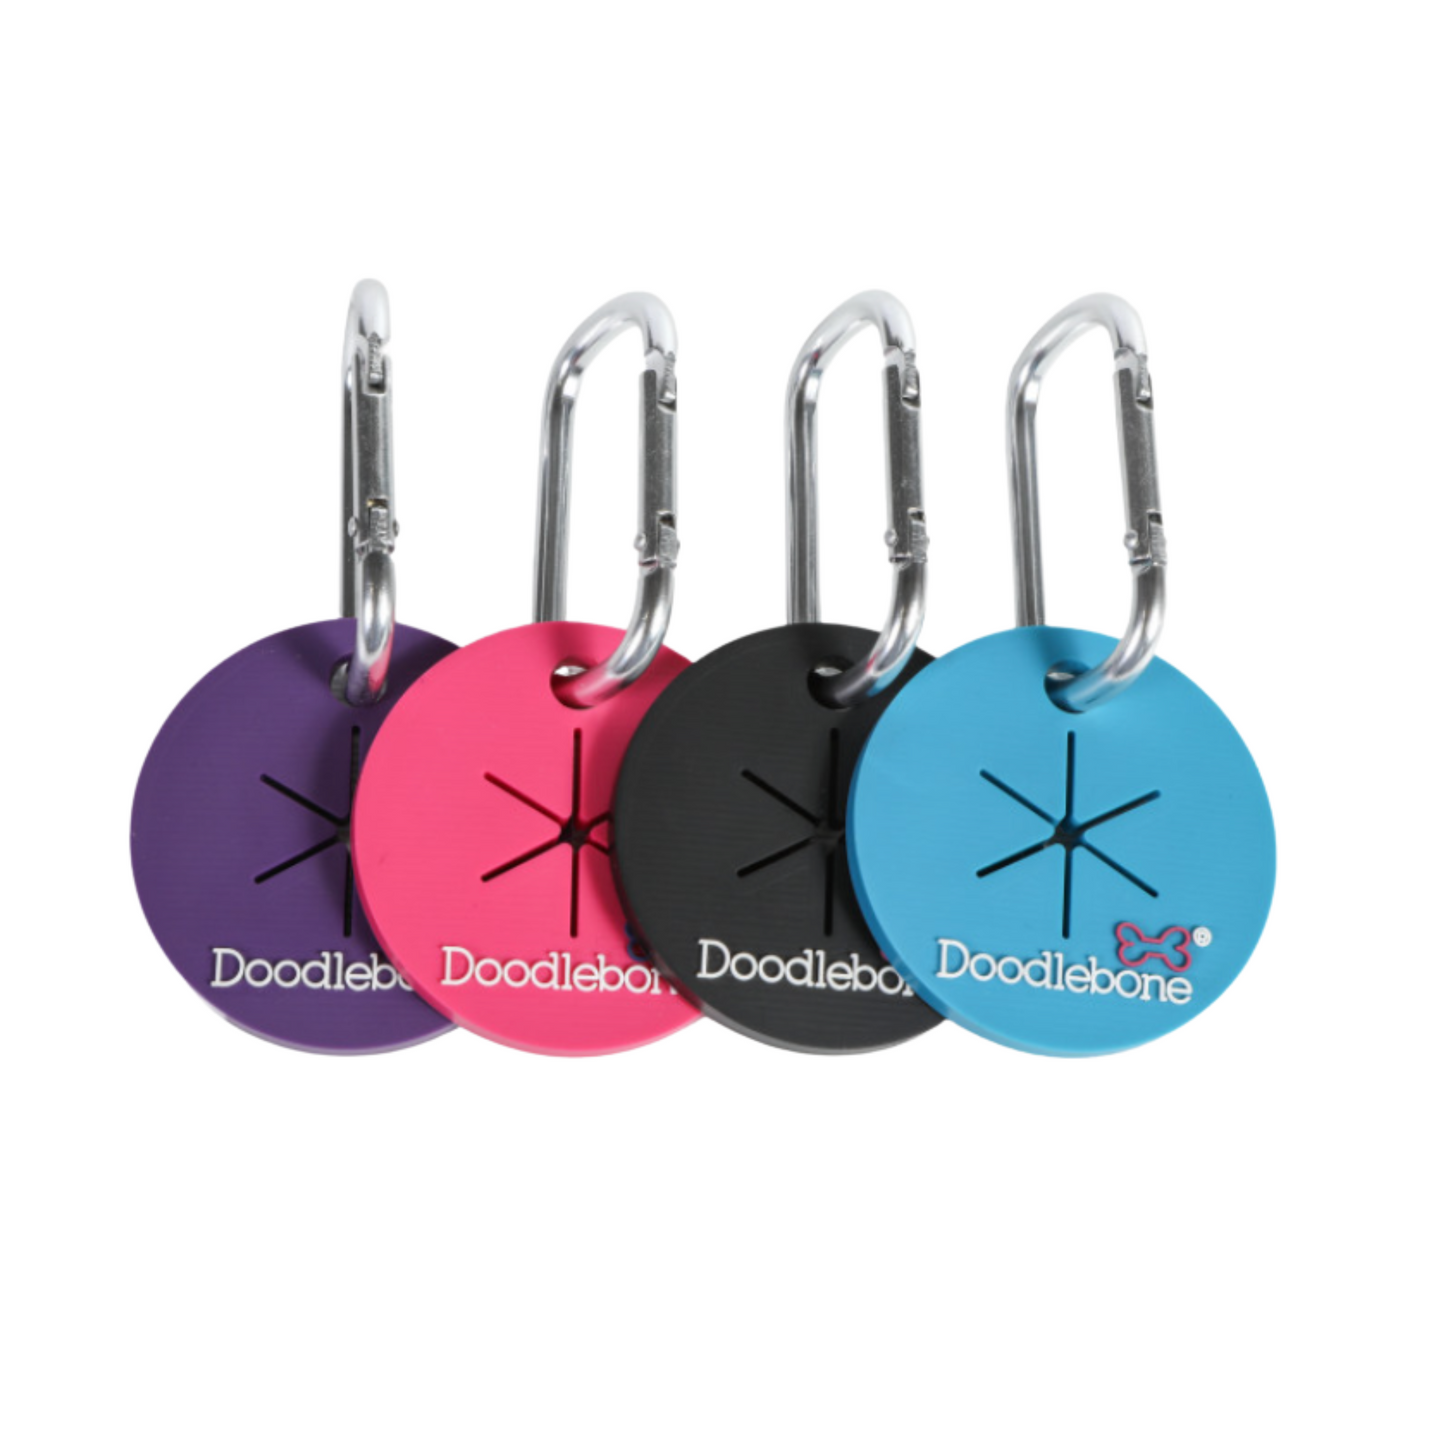 Doodlebone Pick N Clip Poop Bag Carrier Hands Free For Used Poop Bags When There Isn't A Bin in Sight